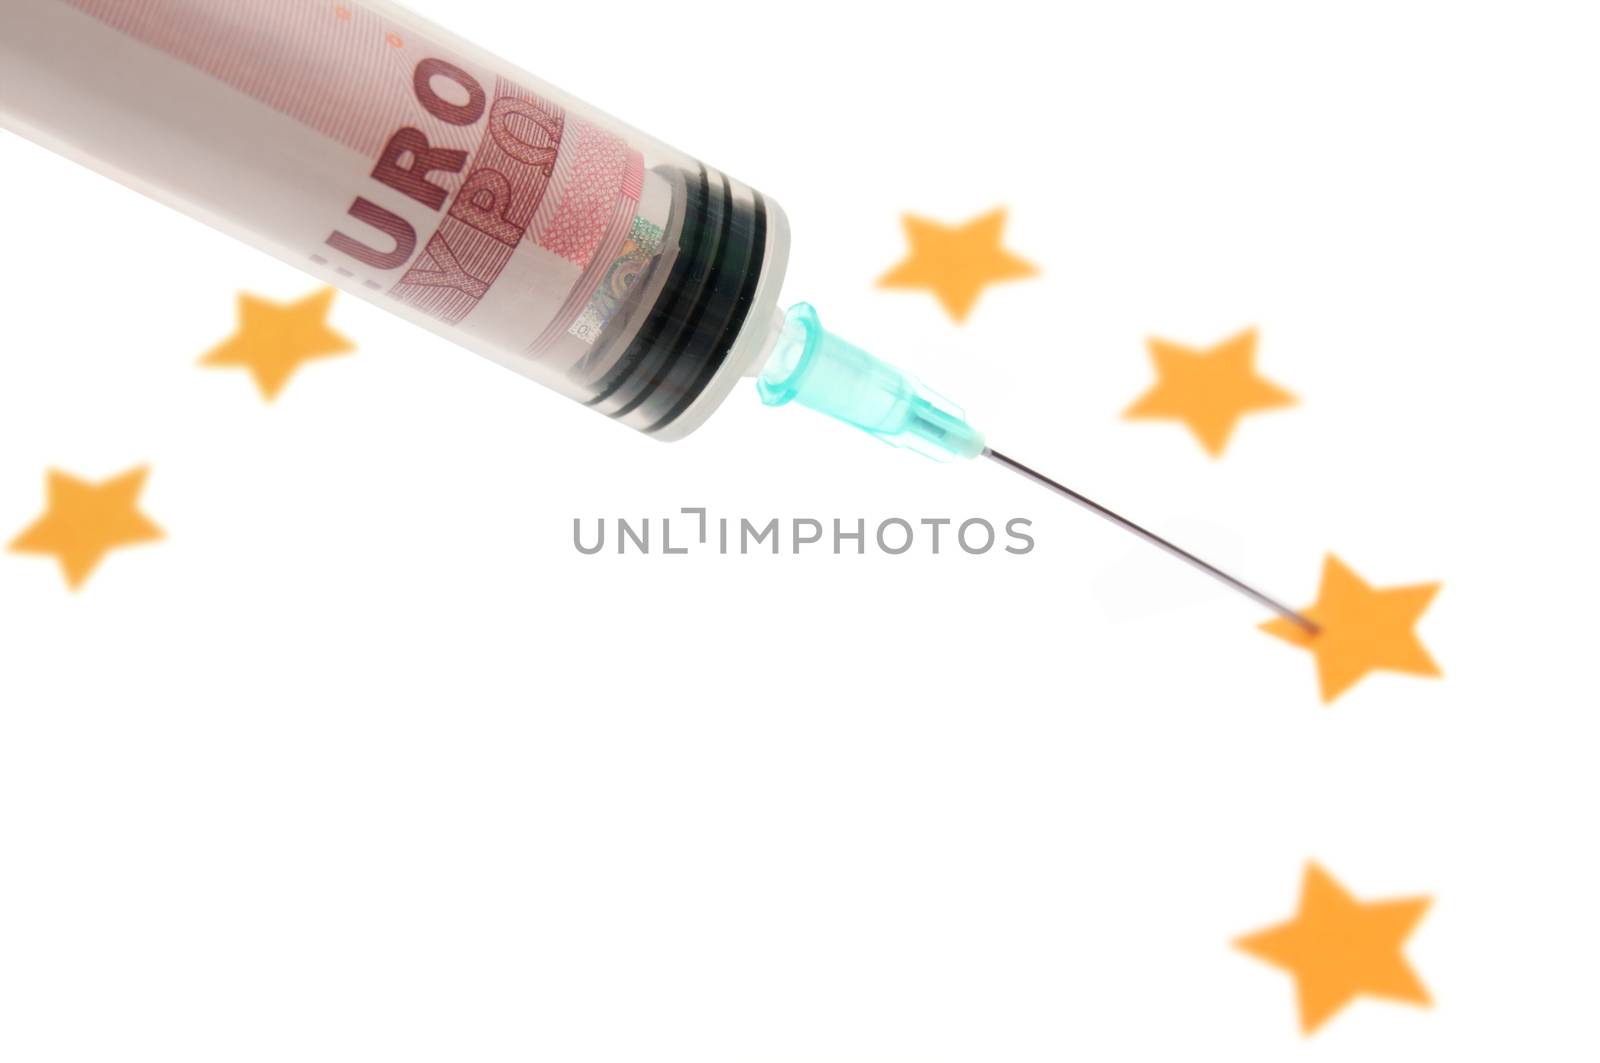 Injection needle containing euro banknotes pinpointing the euro stars symbolising a financial cash injection or bailout concept 